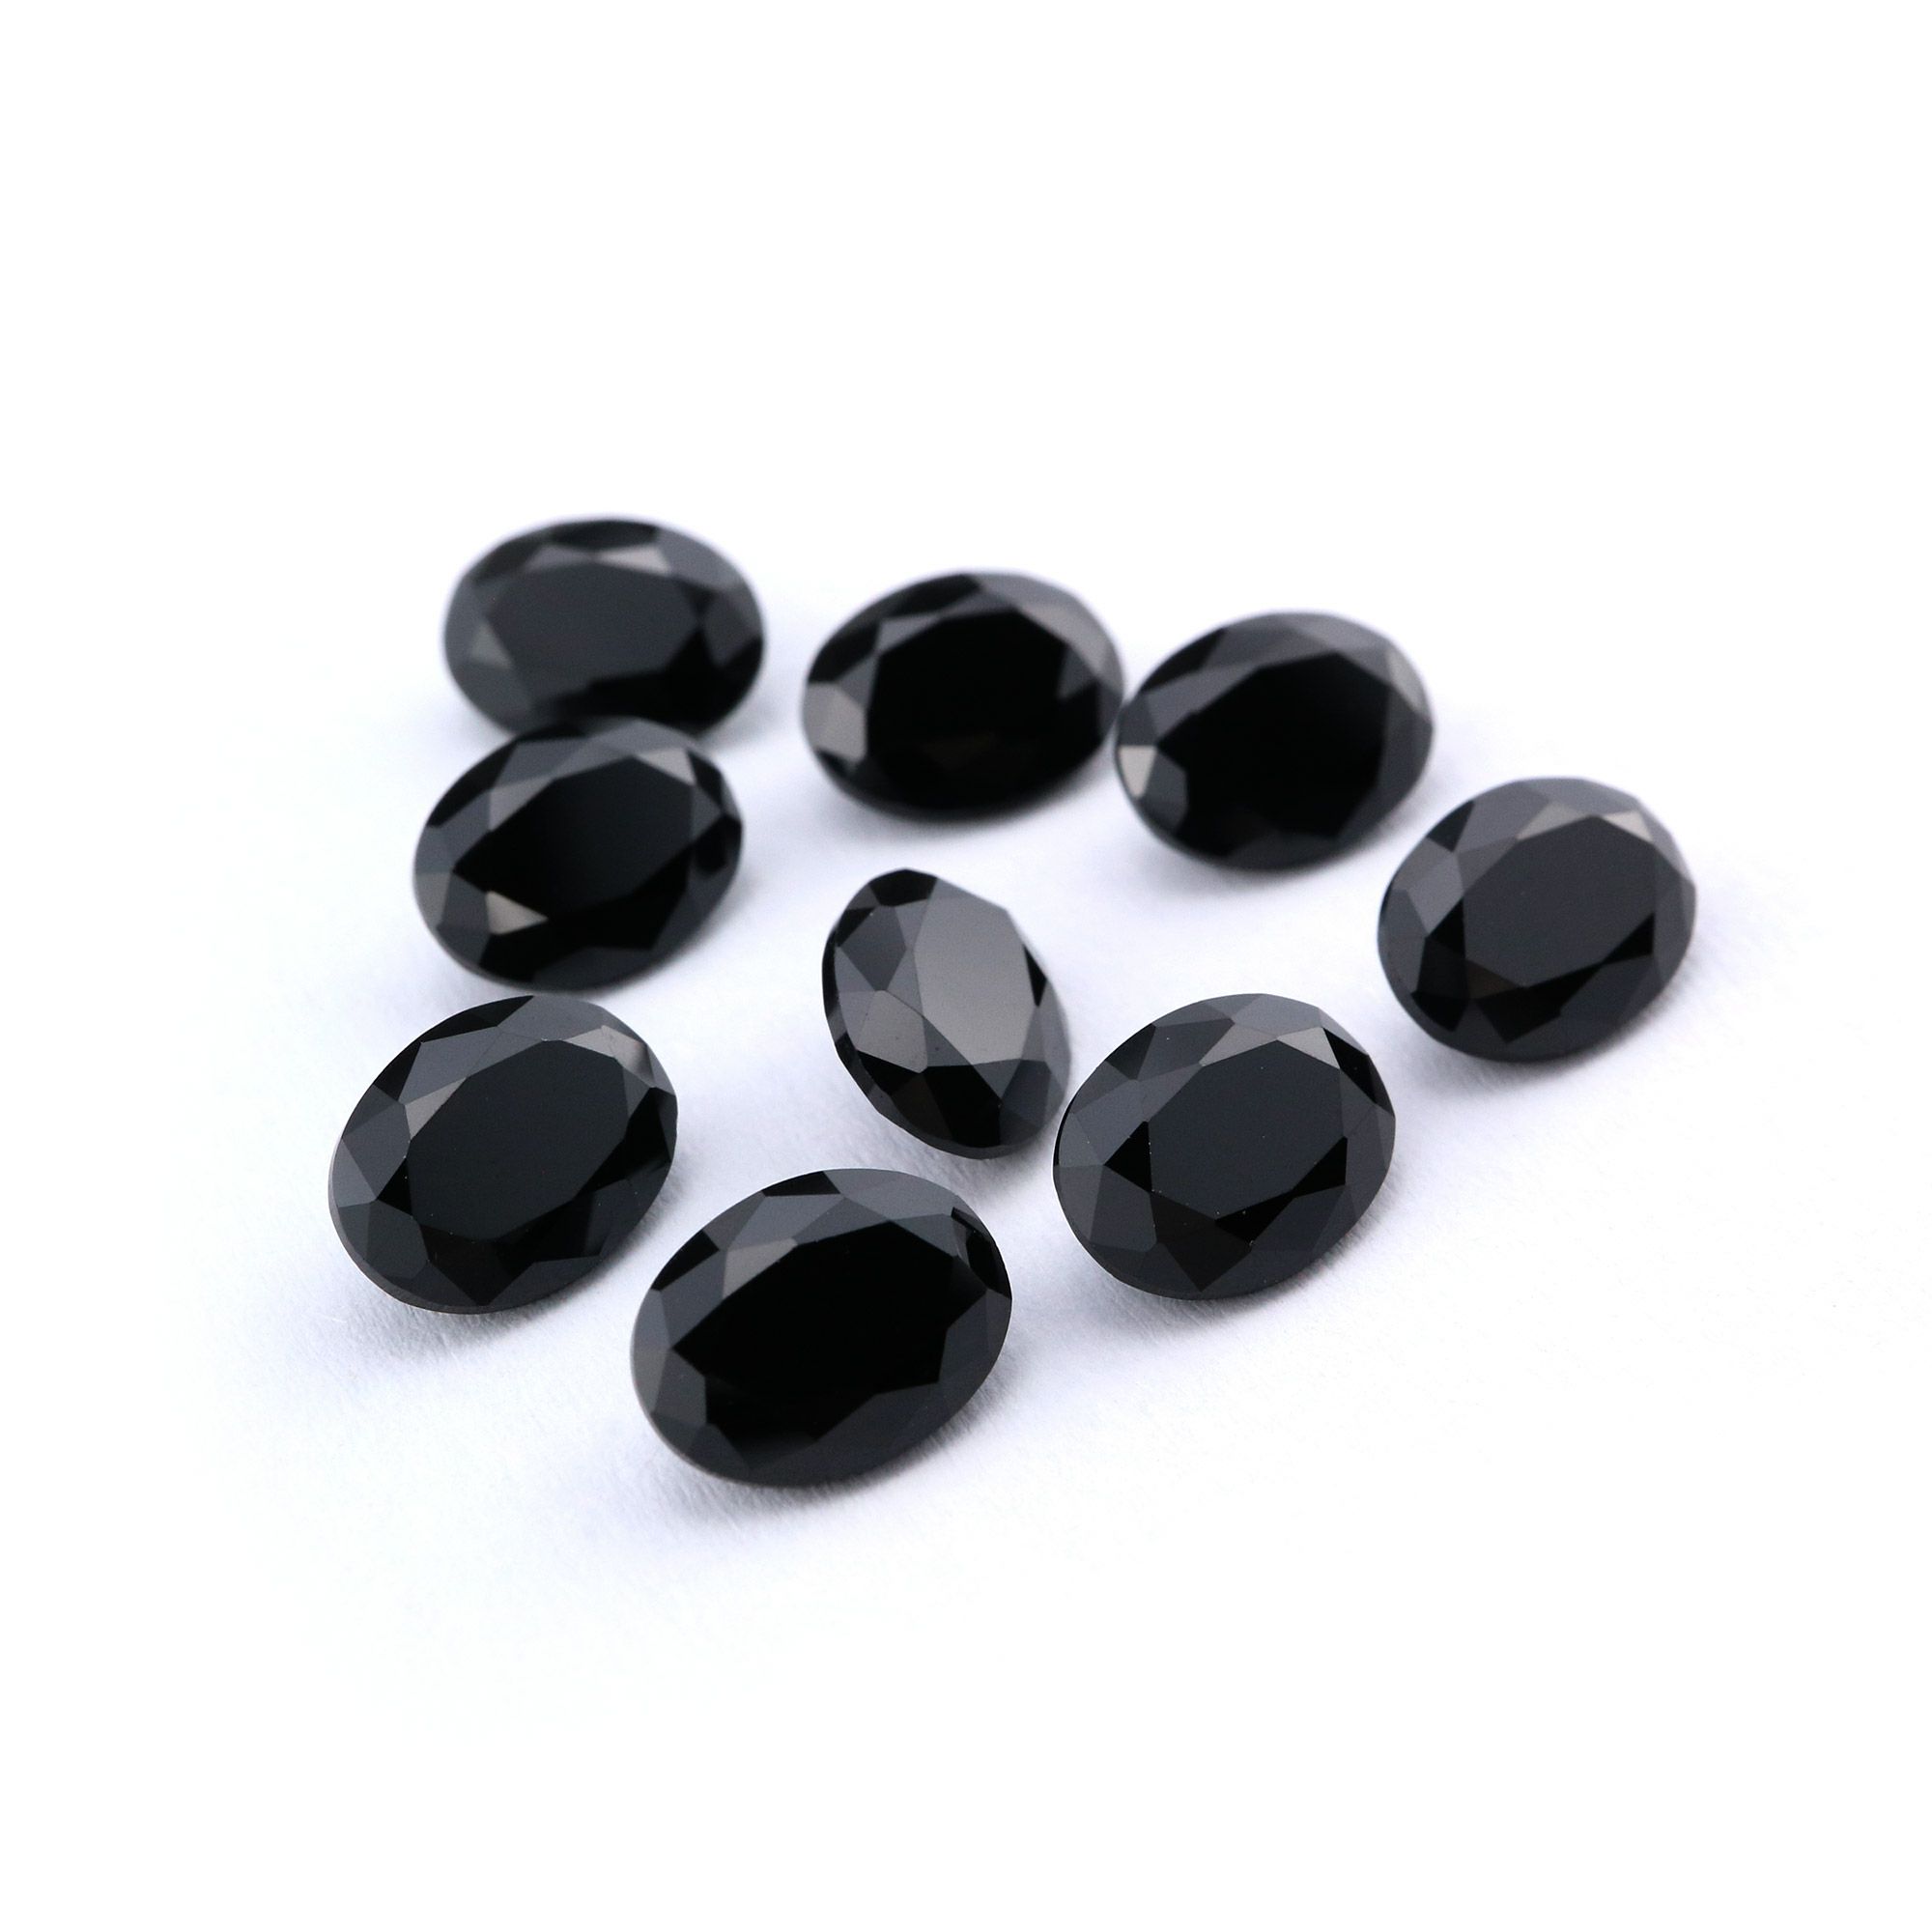 1Pcs Oval Black Spinel Faceted Cut Loose Gemstone Natural Semi Precious Stone DIY Jewelry Supplies 4120125 - Click Image to Close